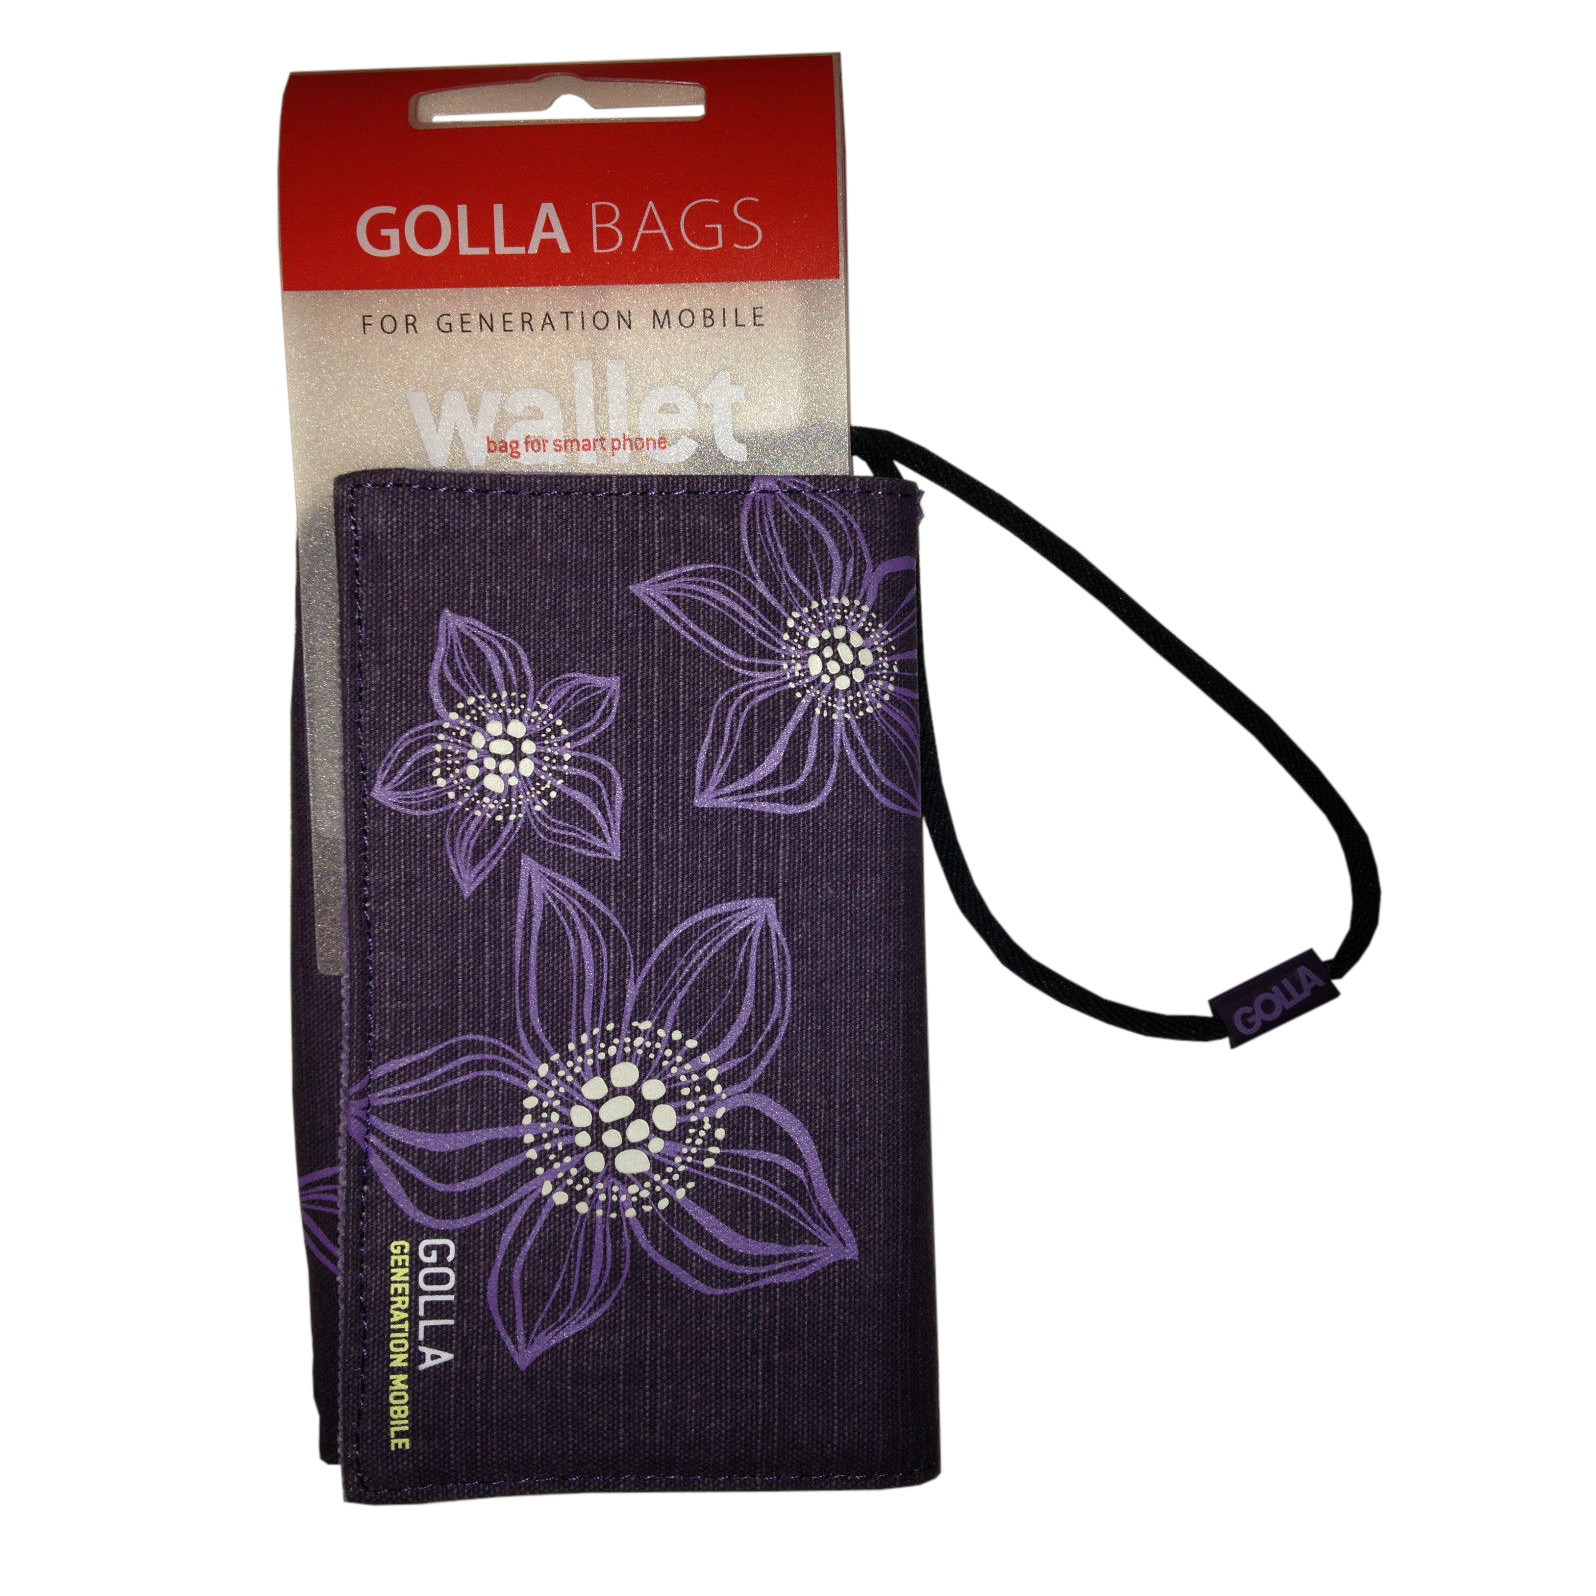 Cash ID MP3 in Purple Cards Golla Bags Wristlet for Smart Phone 